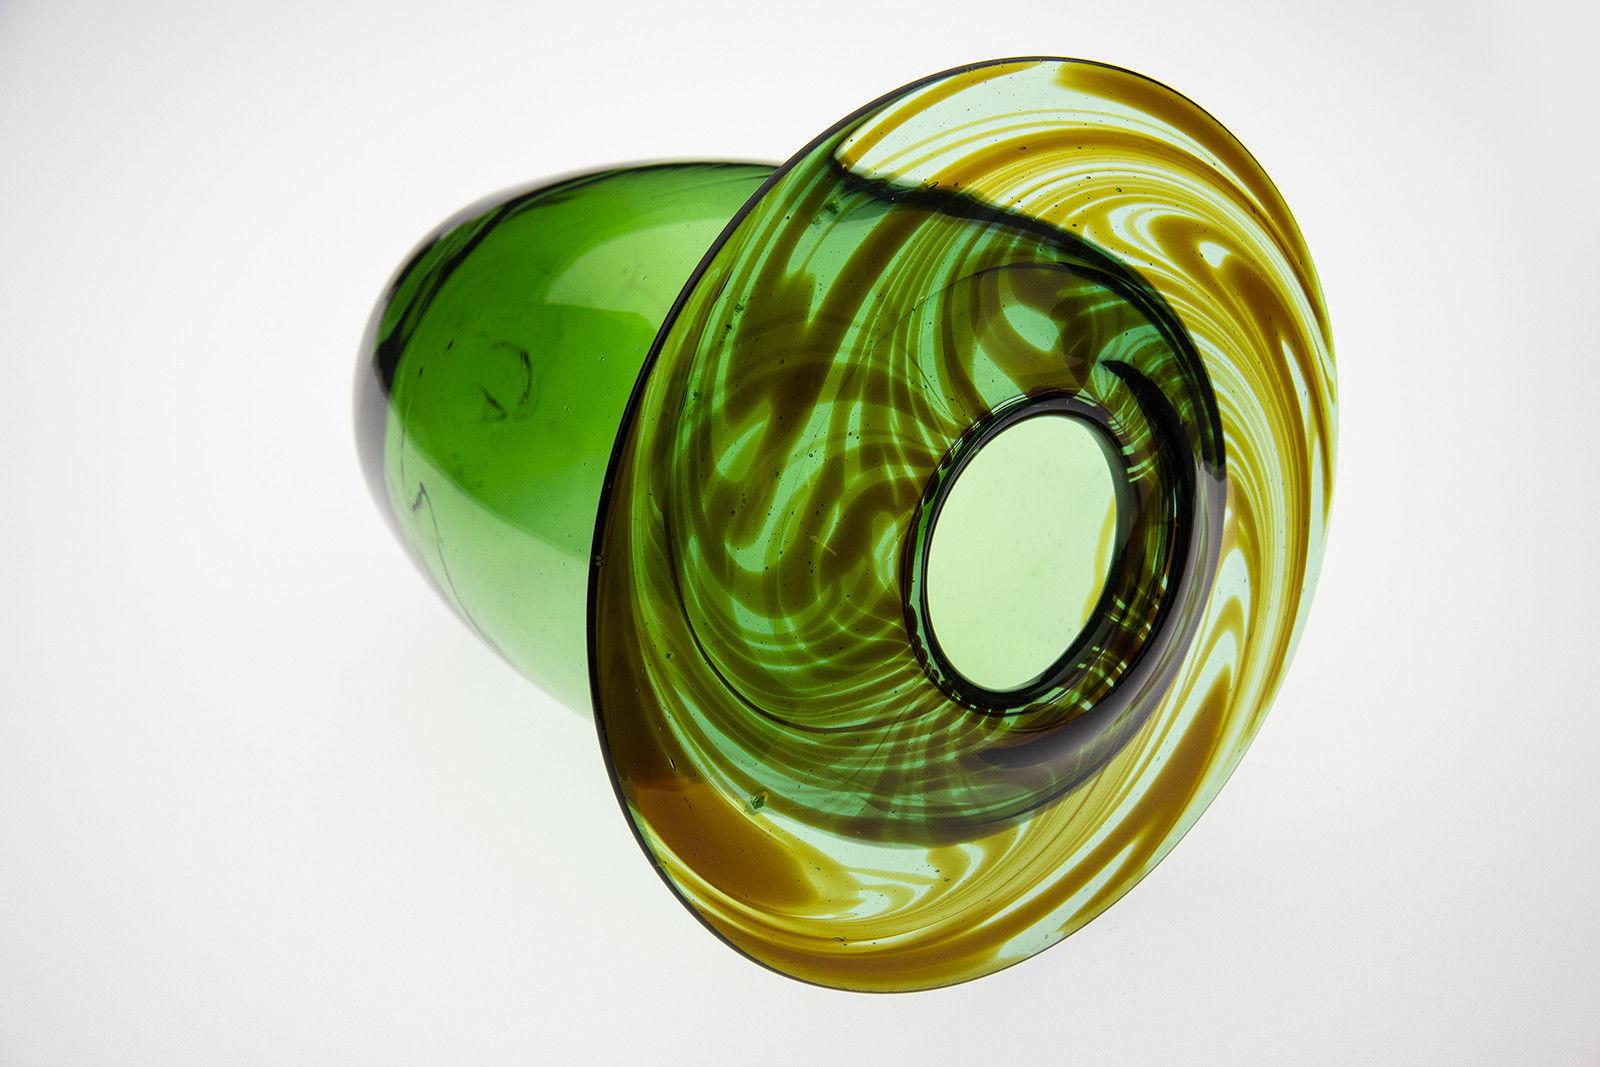 roni horn glass sculpture price